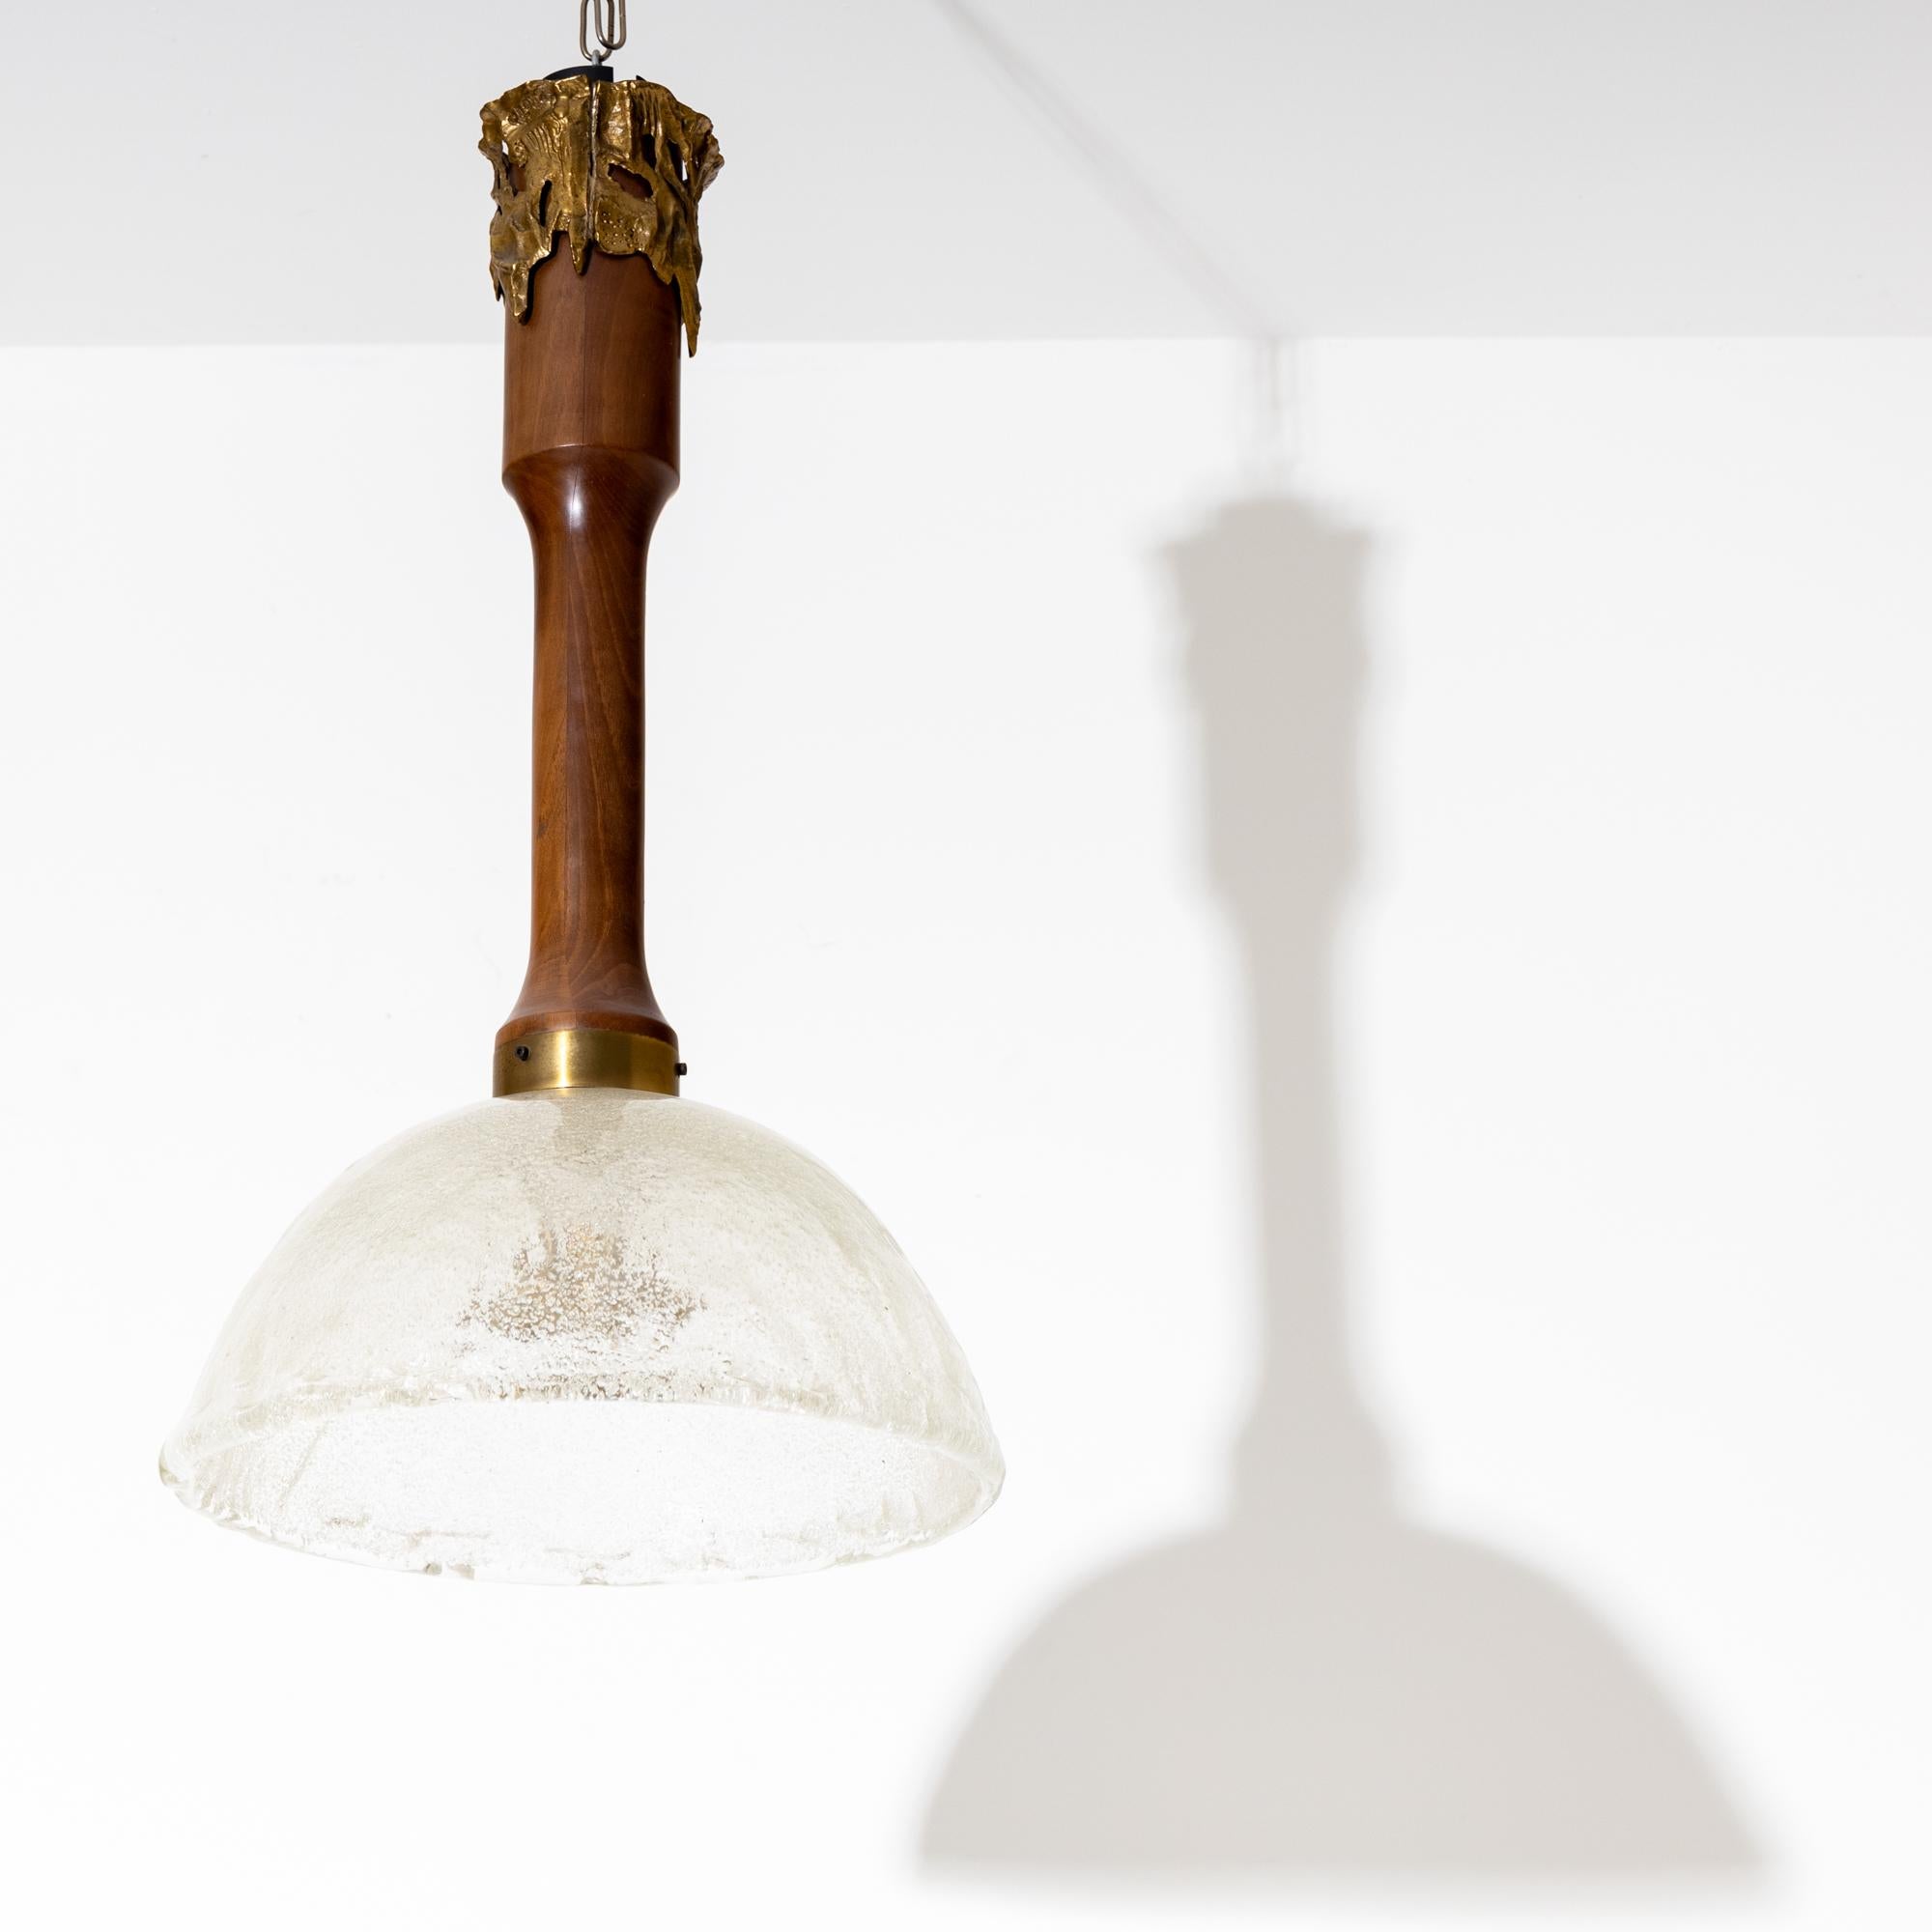 Ceiling lamp with glass shade and wooden shaft. The upper end is surrounded by an irregular bronze relief, signed 